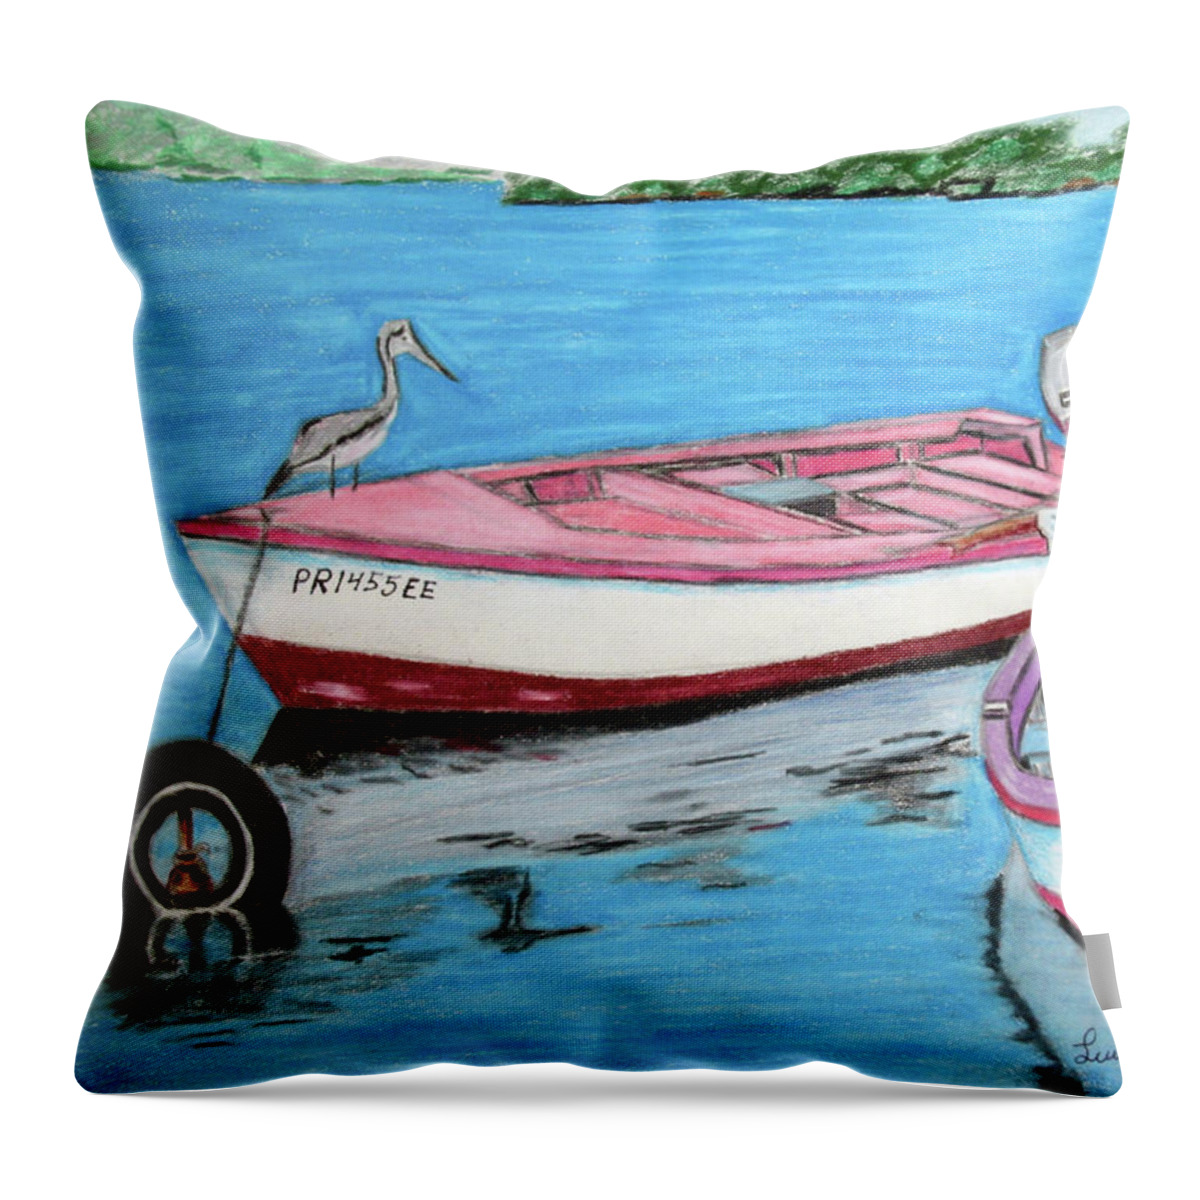 Guanica Throw Pillow featuring the painting El Pescador De Guanica by Luis F Rodriguez